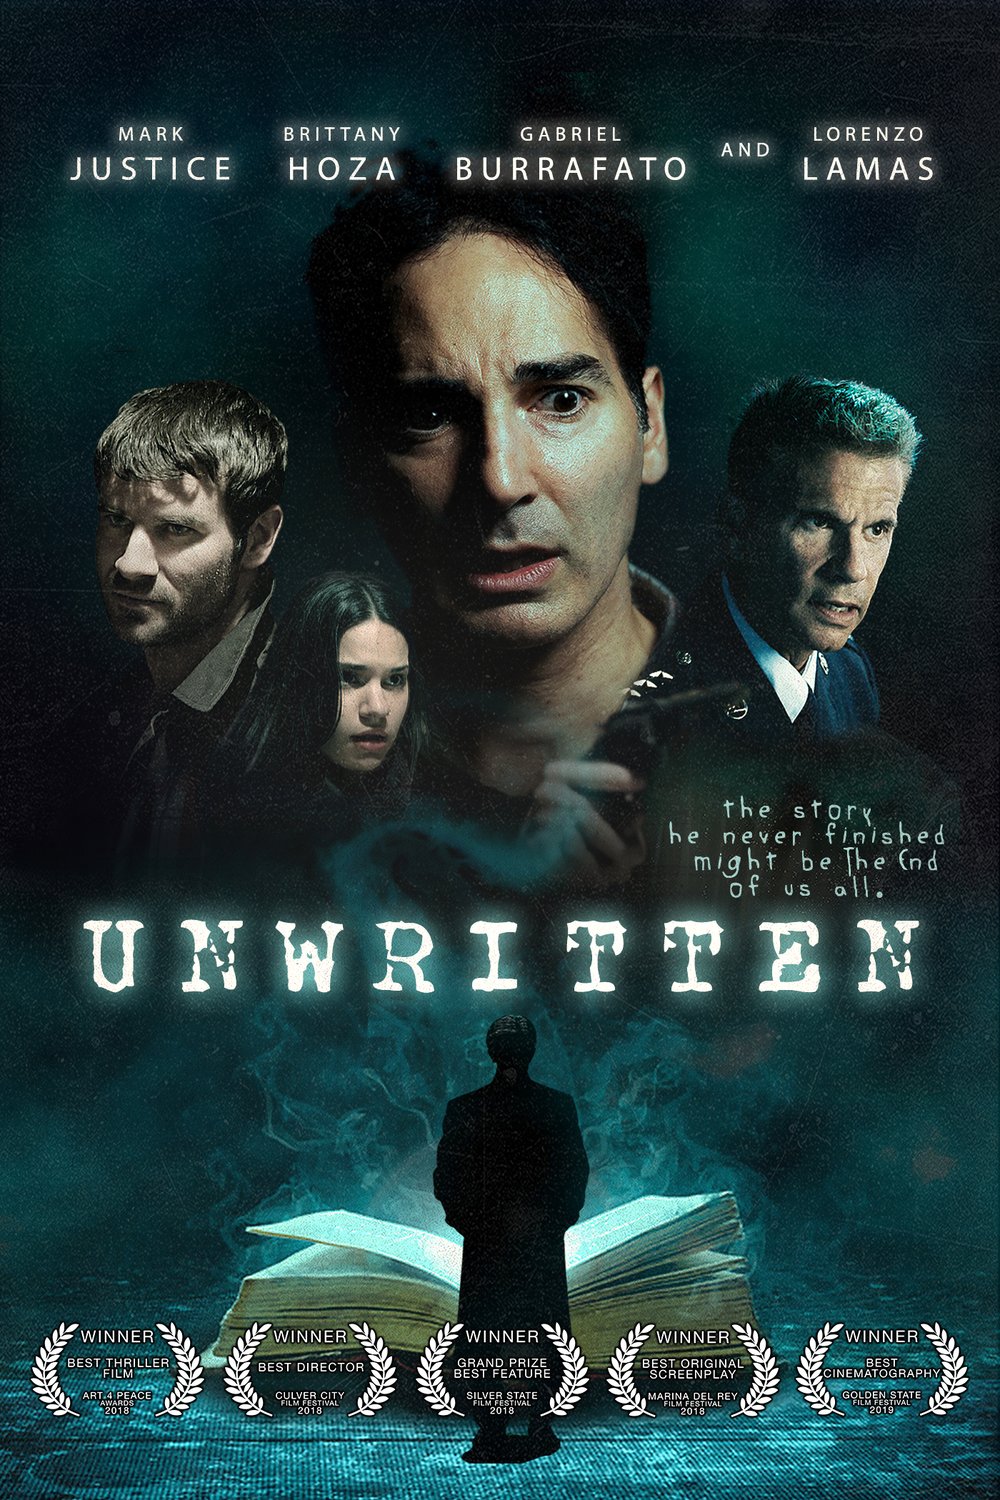 Poster of the movie Unwritten